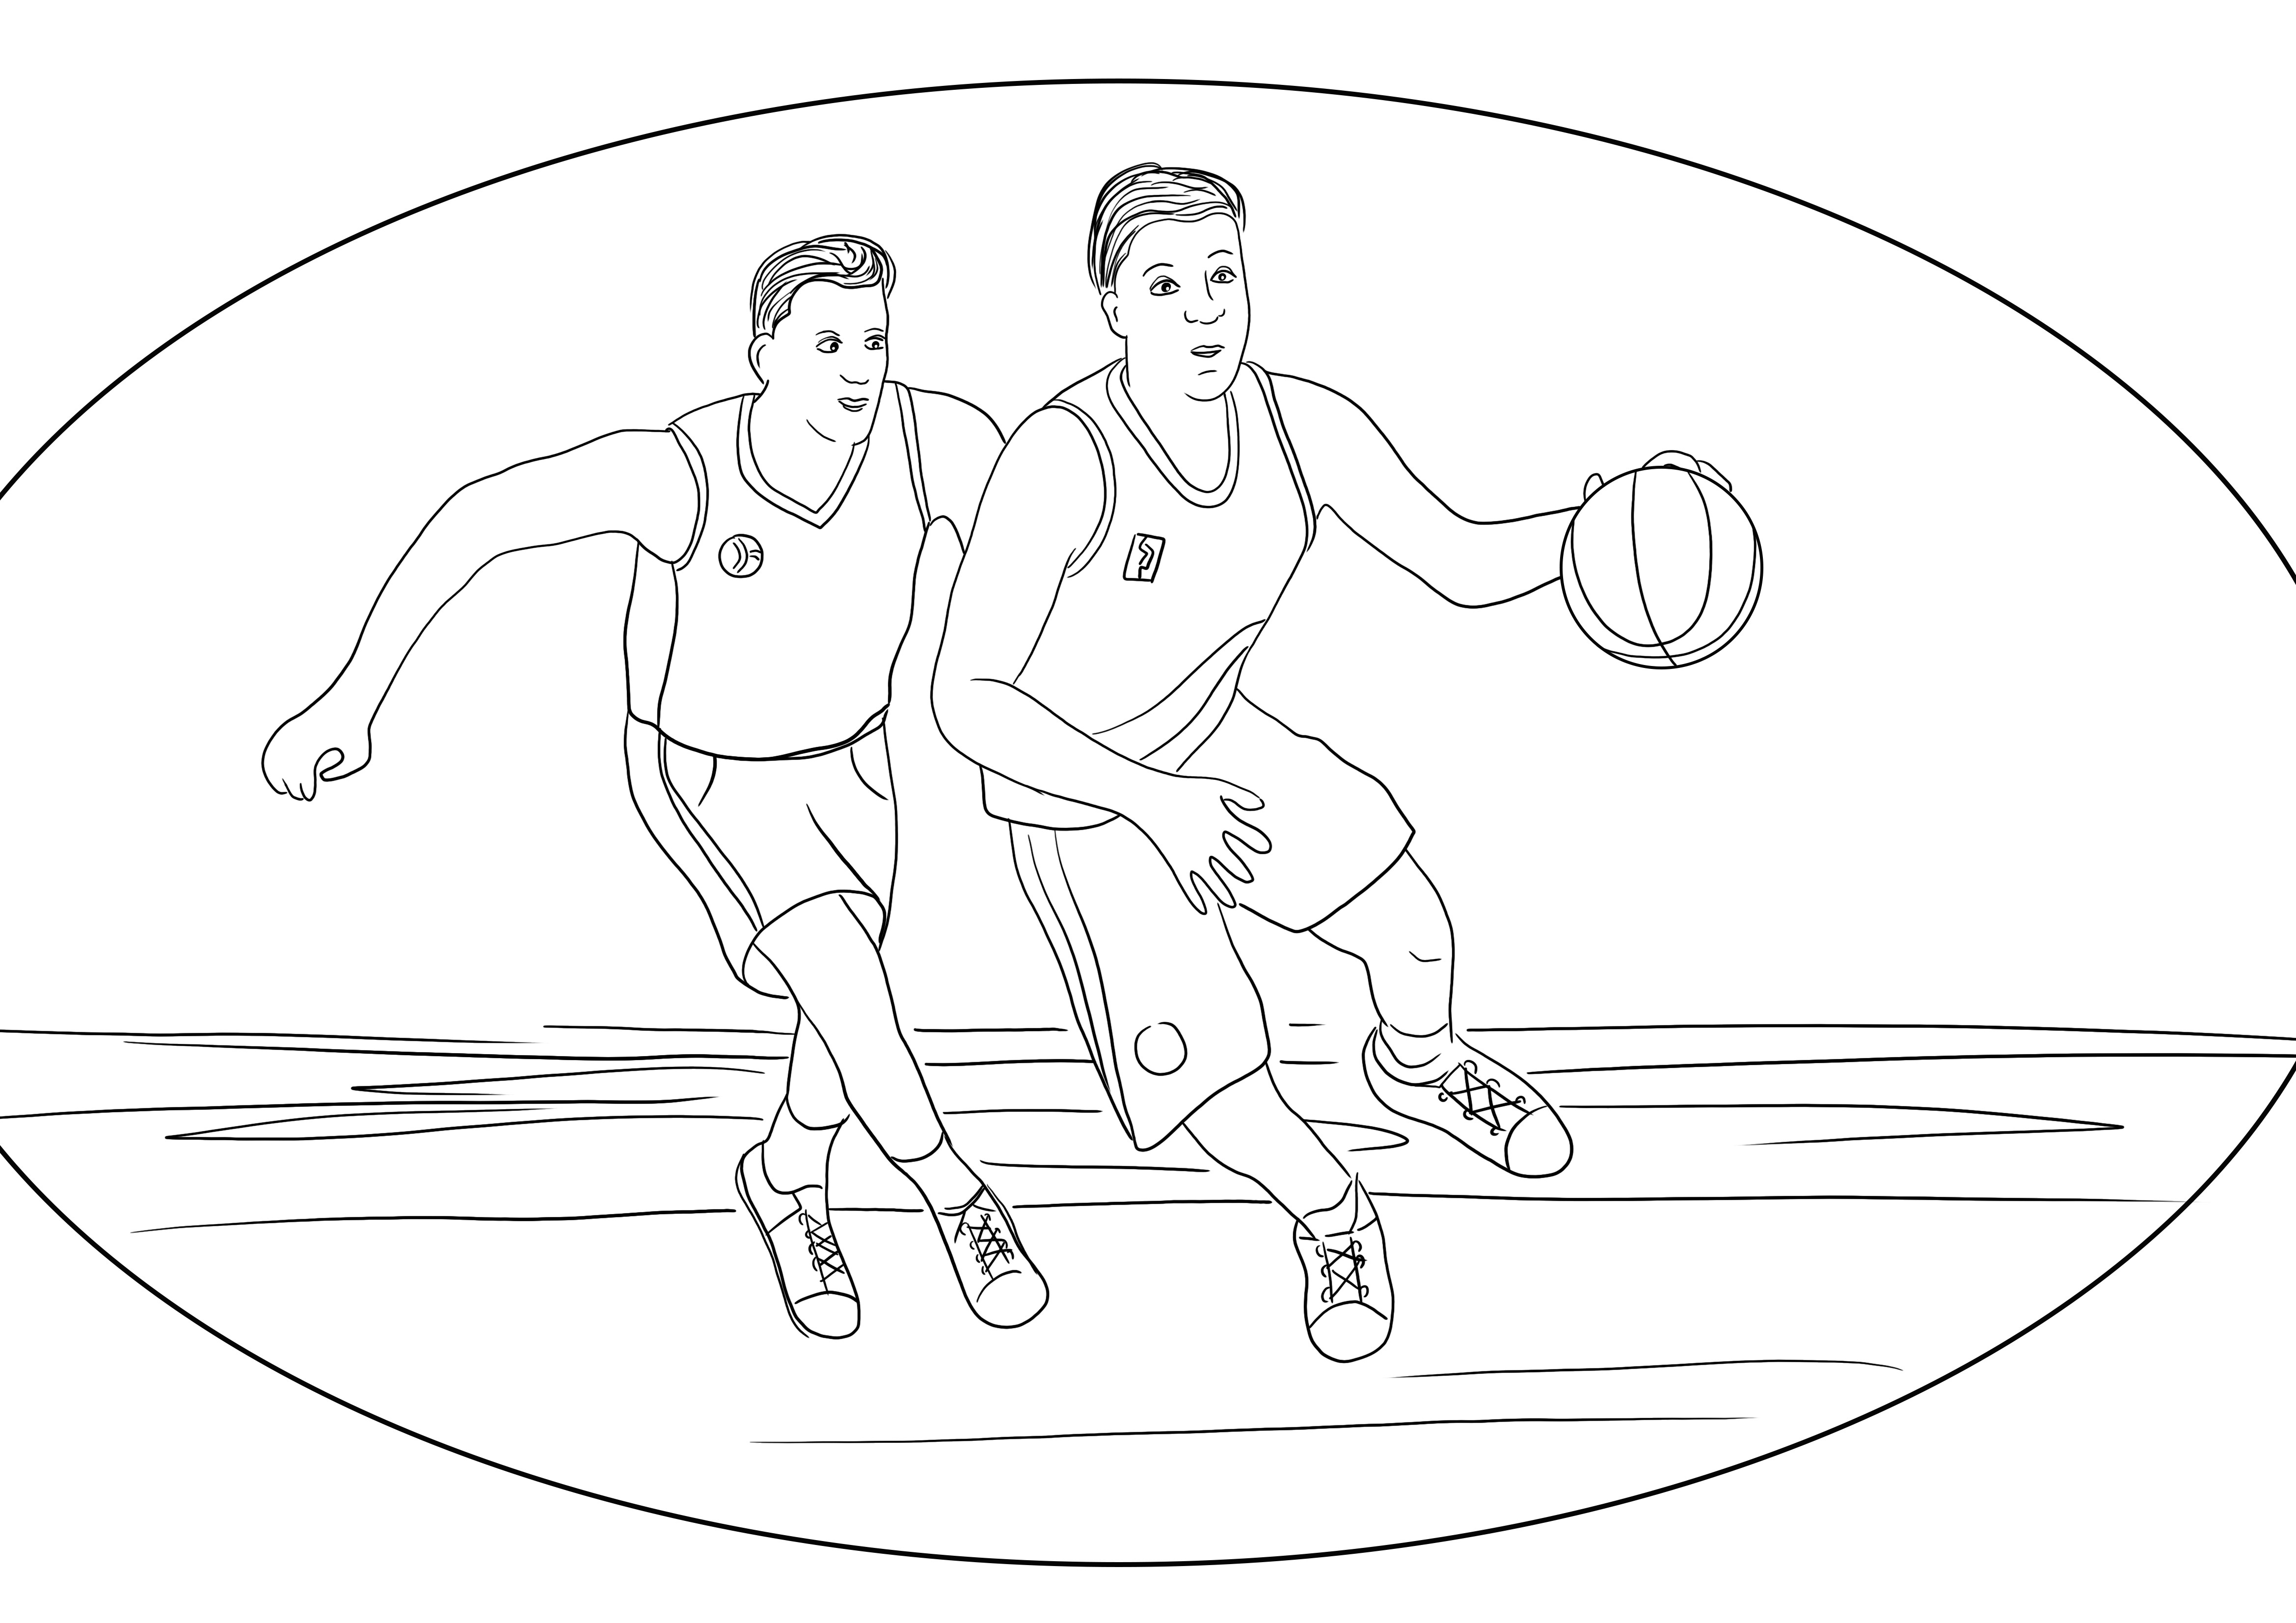 Free downloading page of a basketball game easy to color by kids